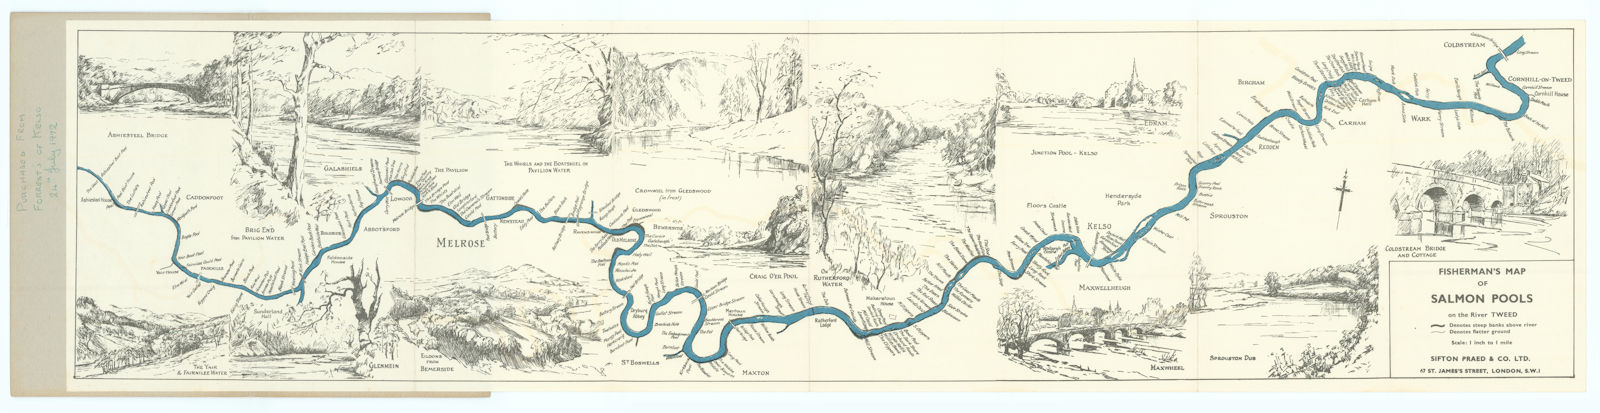 Associate Product Fisherman's Map of Salmon Pools on the River Tweed by Maude Parker 1933 (1960)